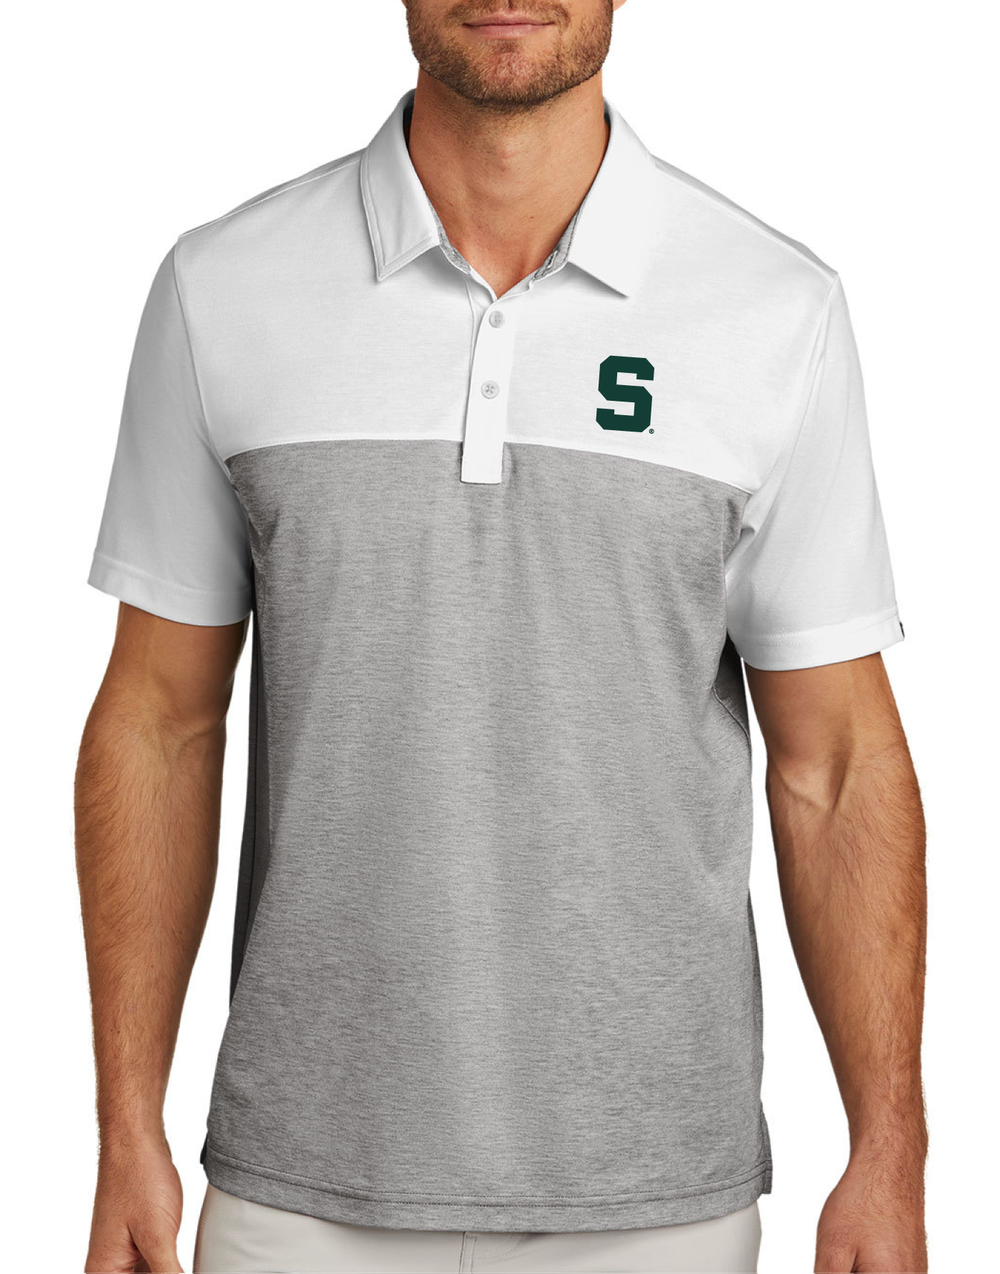 Michigan State Polo featuring the Block S logo from Nudge Printing